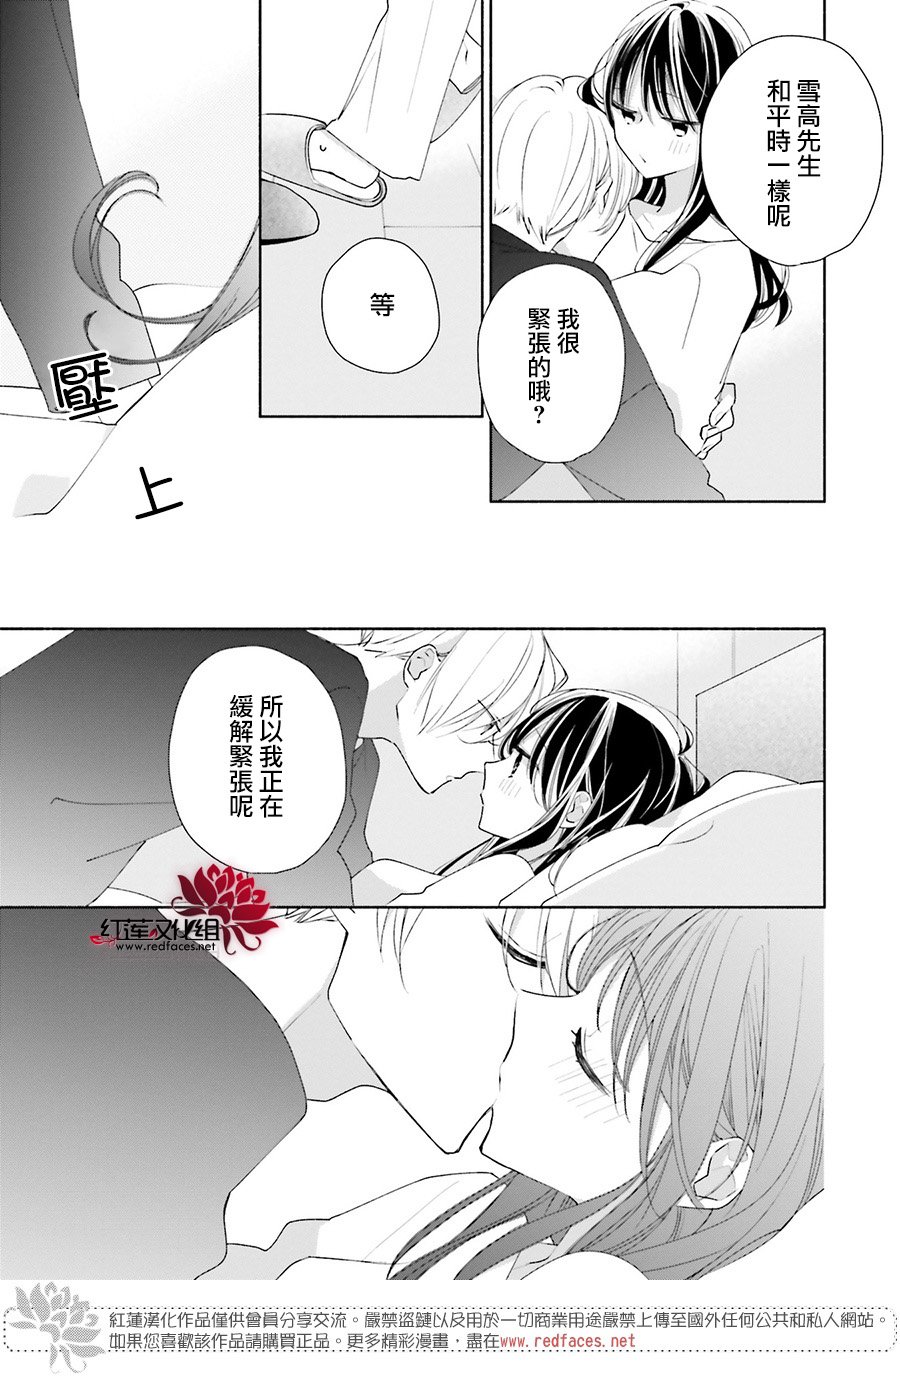 If given a second chance - 第46話(2/2) - 3